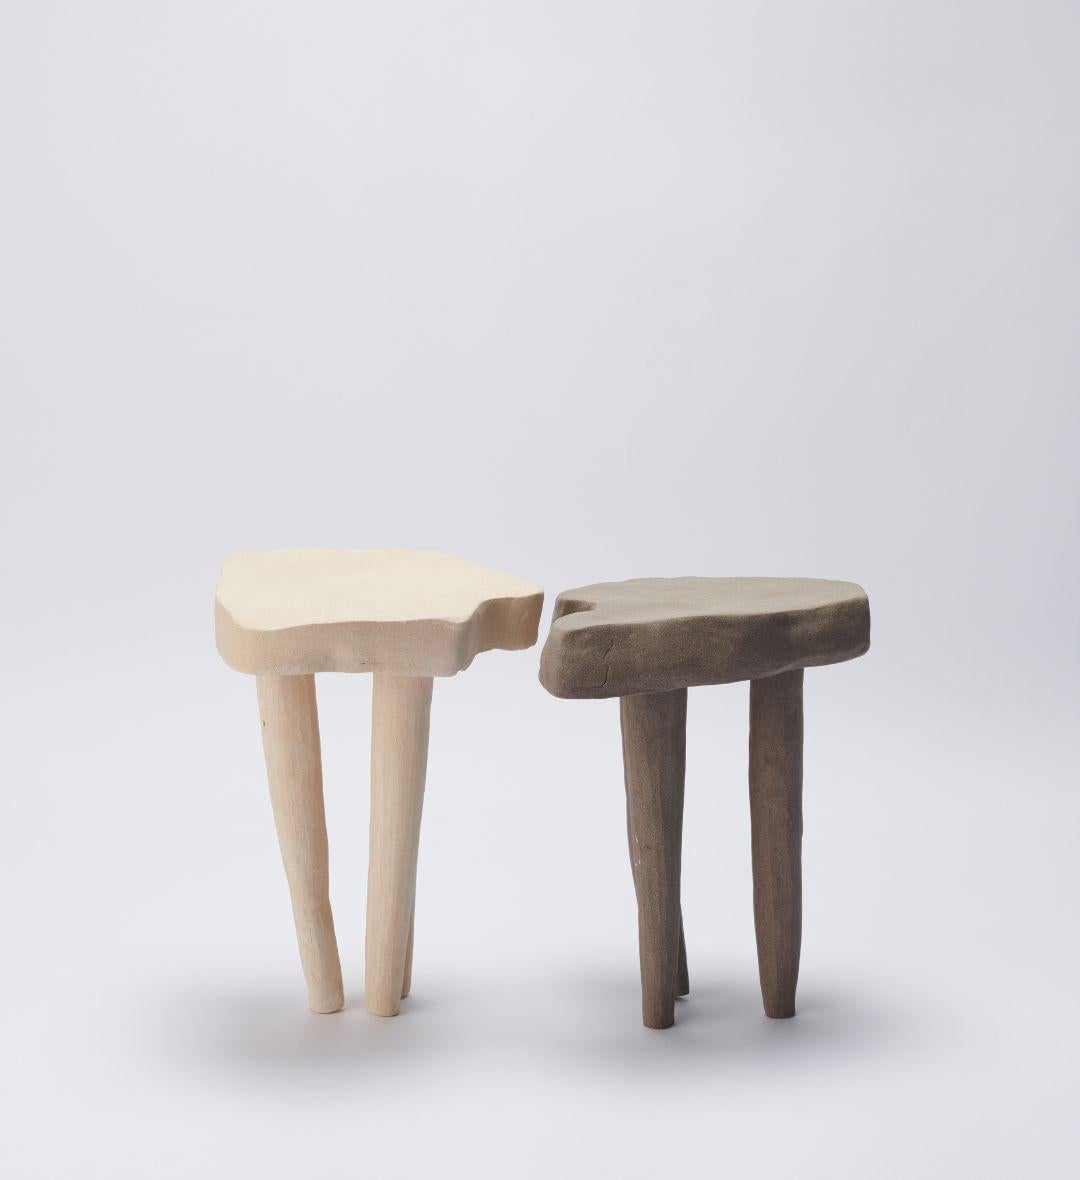 Set Of 2 01 & 02 Stools by Joana Kieppe
Unique Piece.
Dimensions: D 16 x W 14 x H 26 cm.
Materials: Ivory and lotus high temperature clay.

Reproduction is entirely manual, therefore it will be a very similar, but unique piece. all pieces are